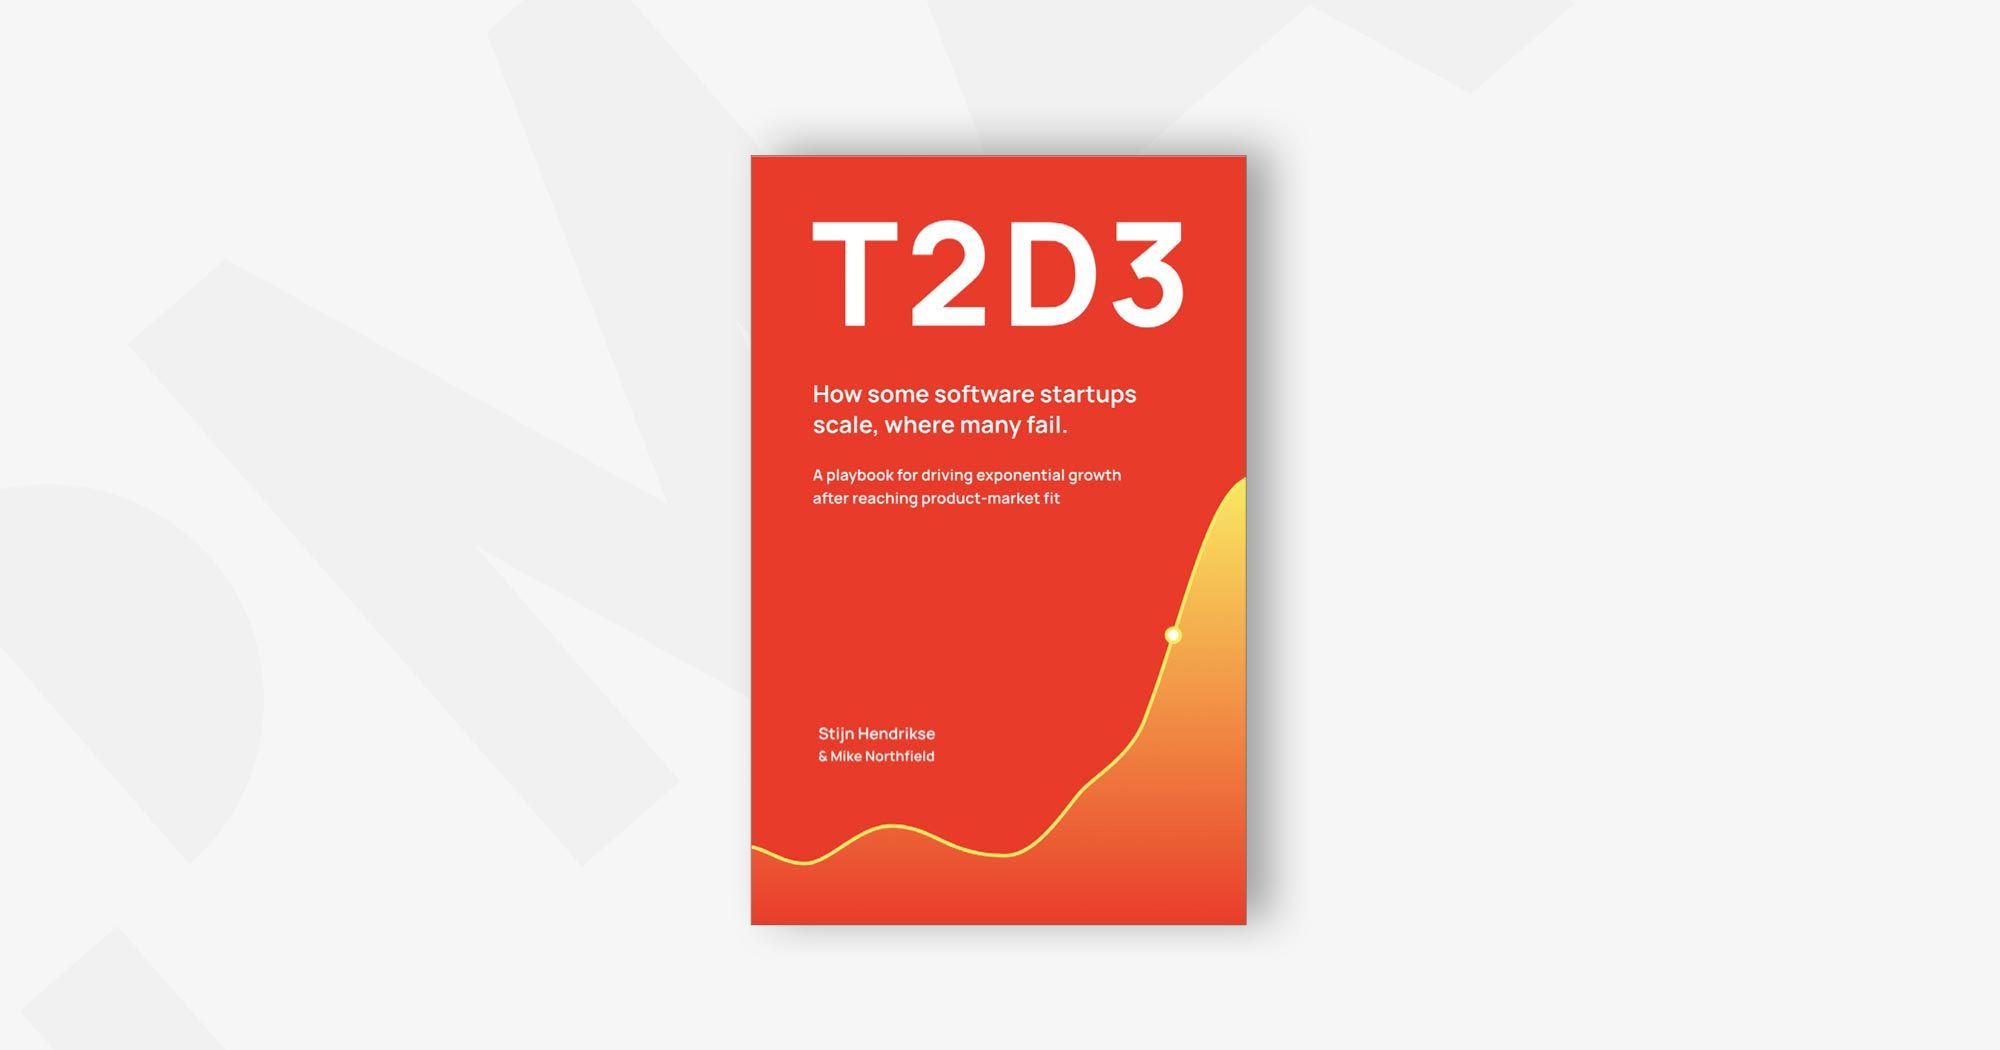 T2D3: How some software startups scale, where many fail – Stijn Hendrikse